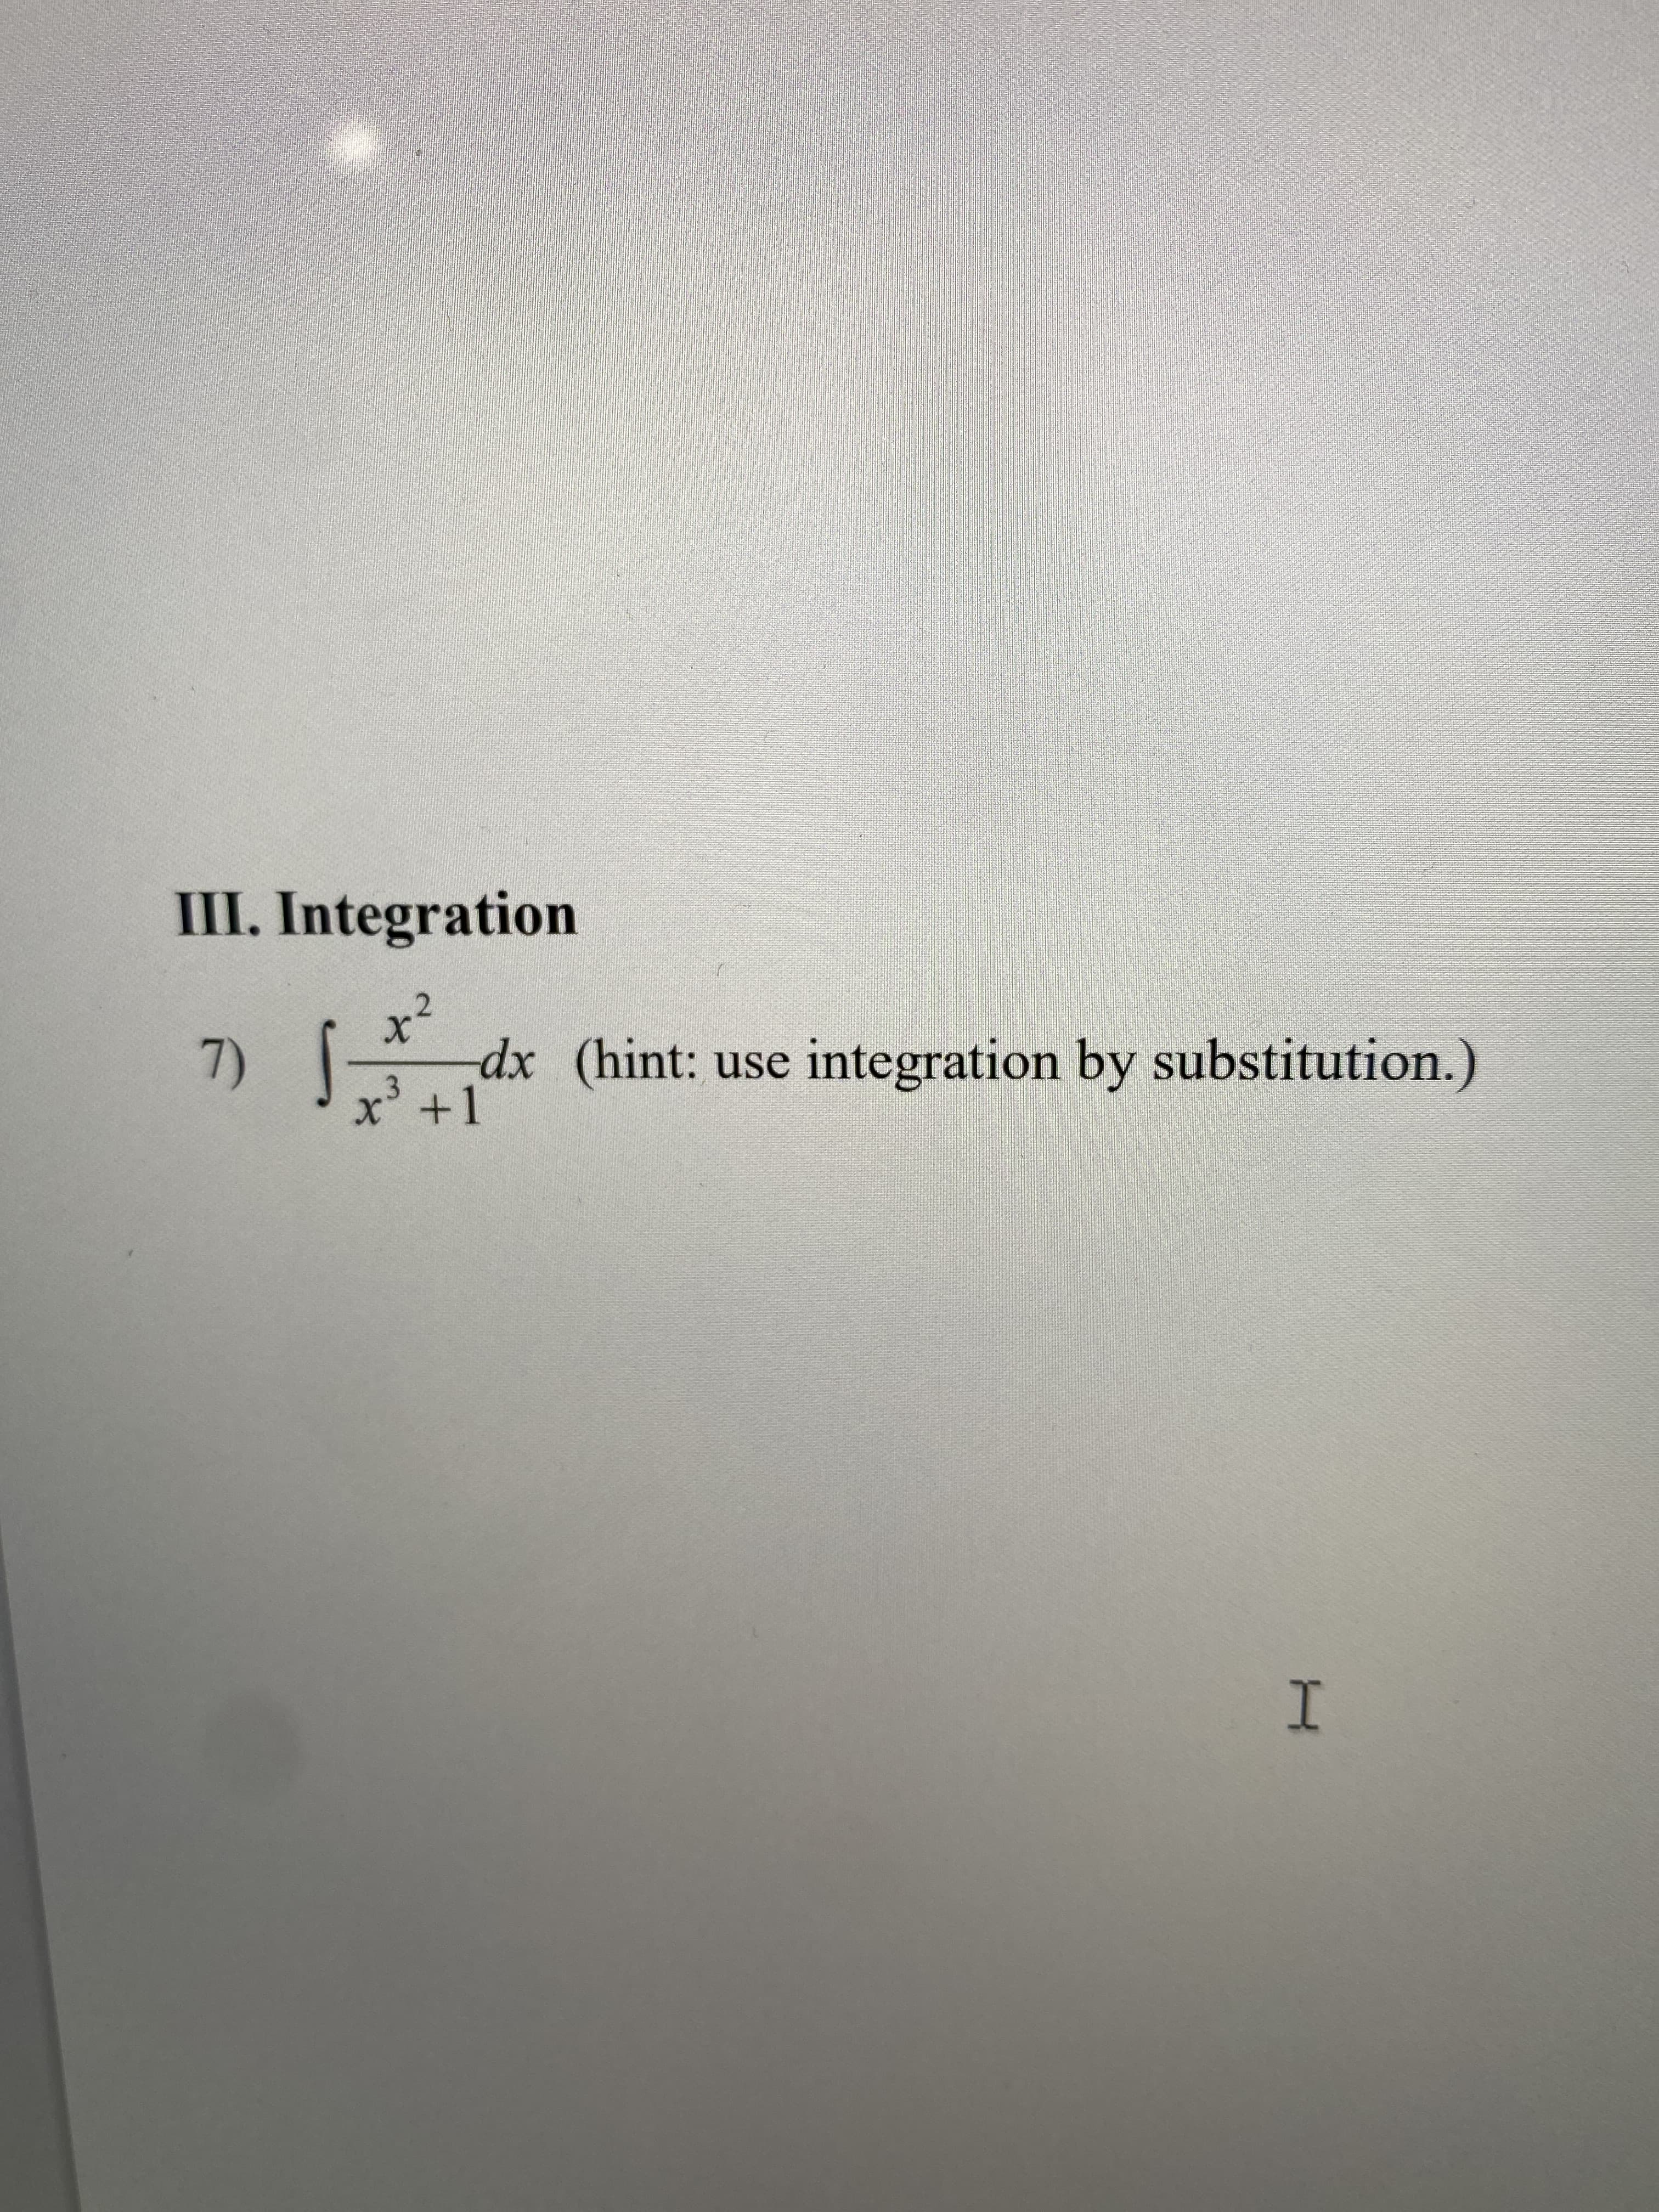 ### III. Integration

#### Problem 7
Evaluate the integral 

\[ \int \frac{x^2}{x^3 + 1} \, dx \]

*Hint: Use integration by substitution.*